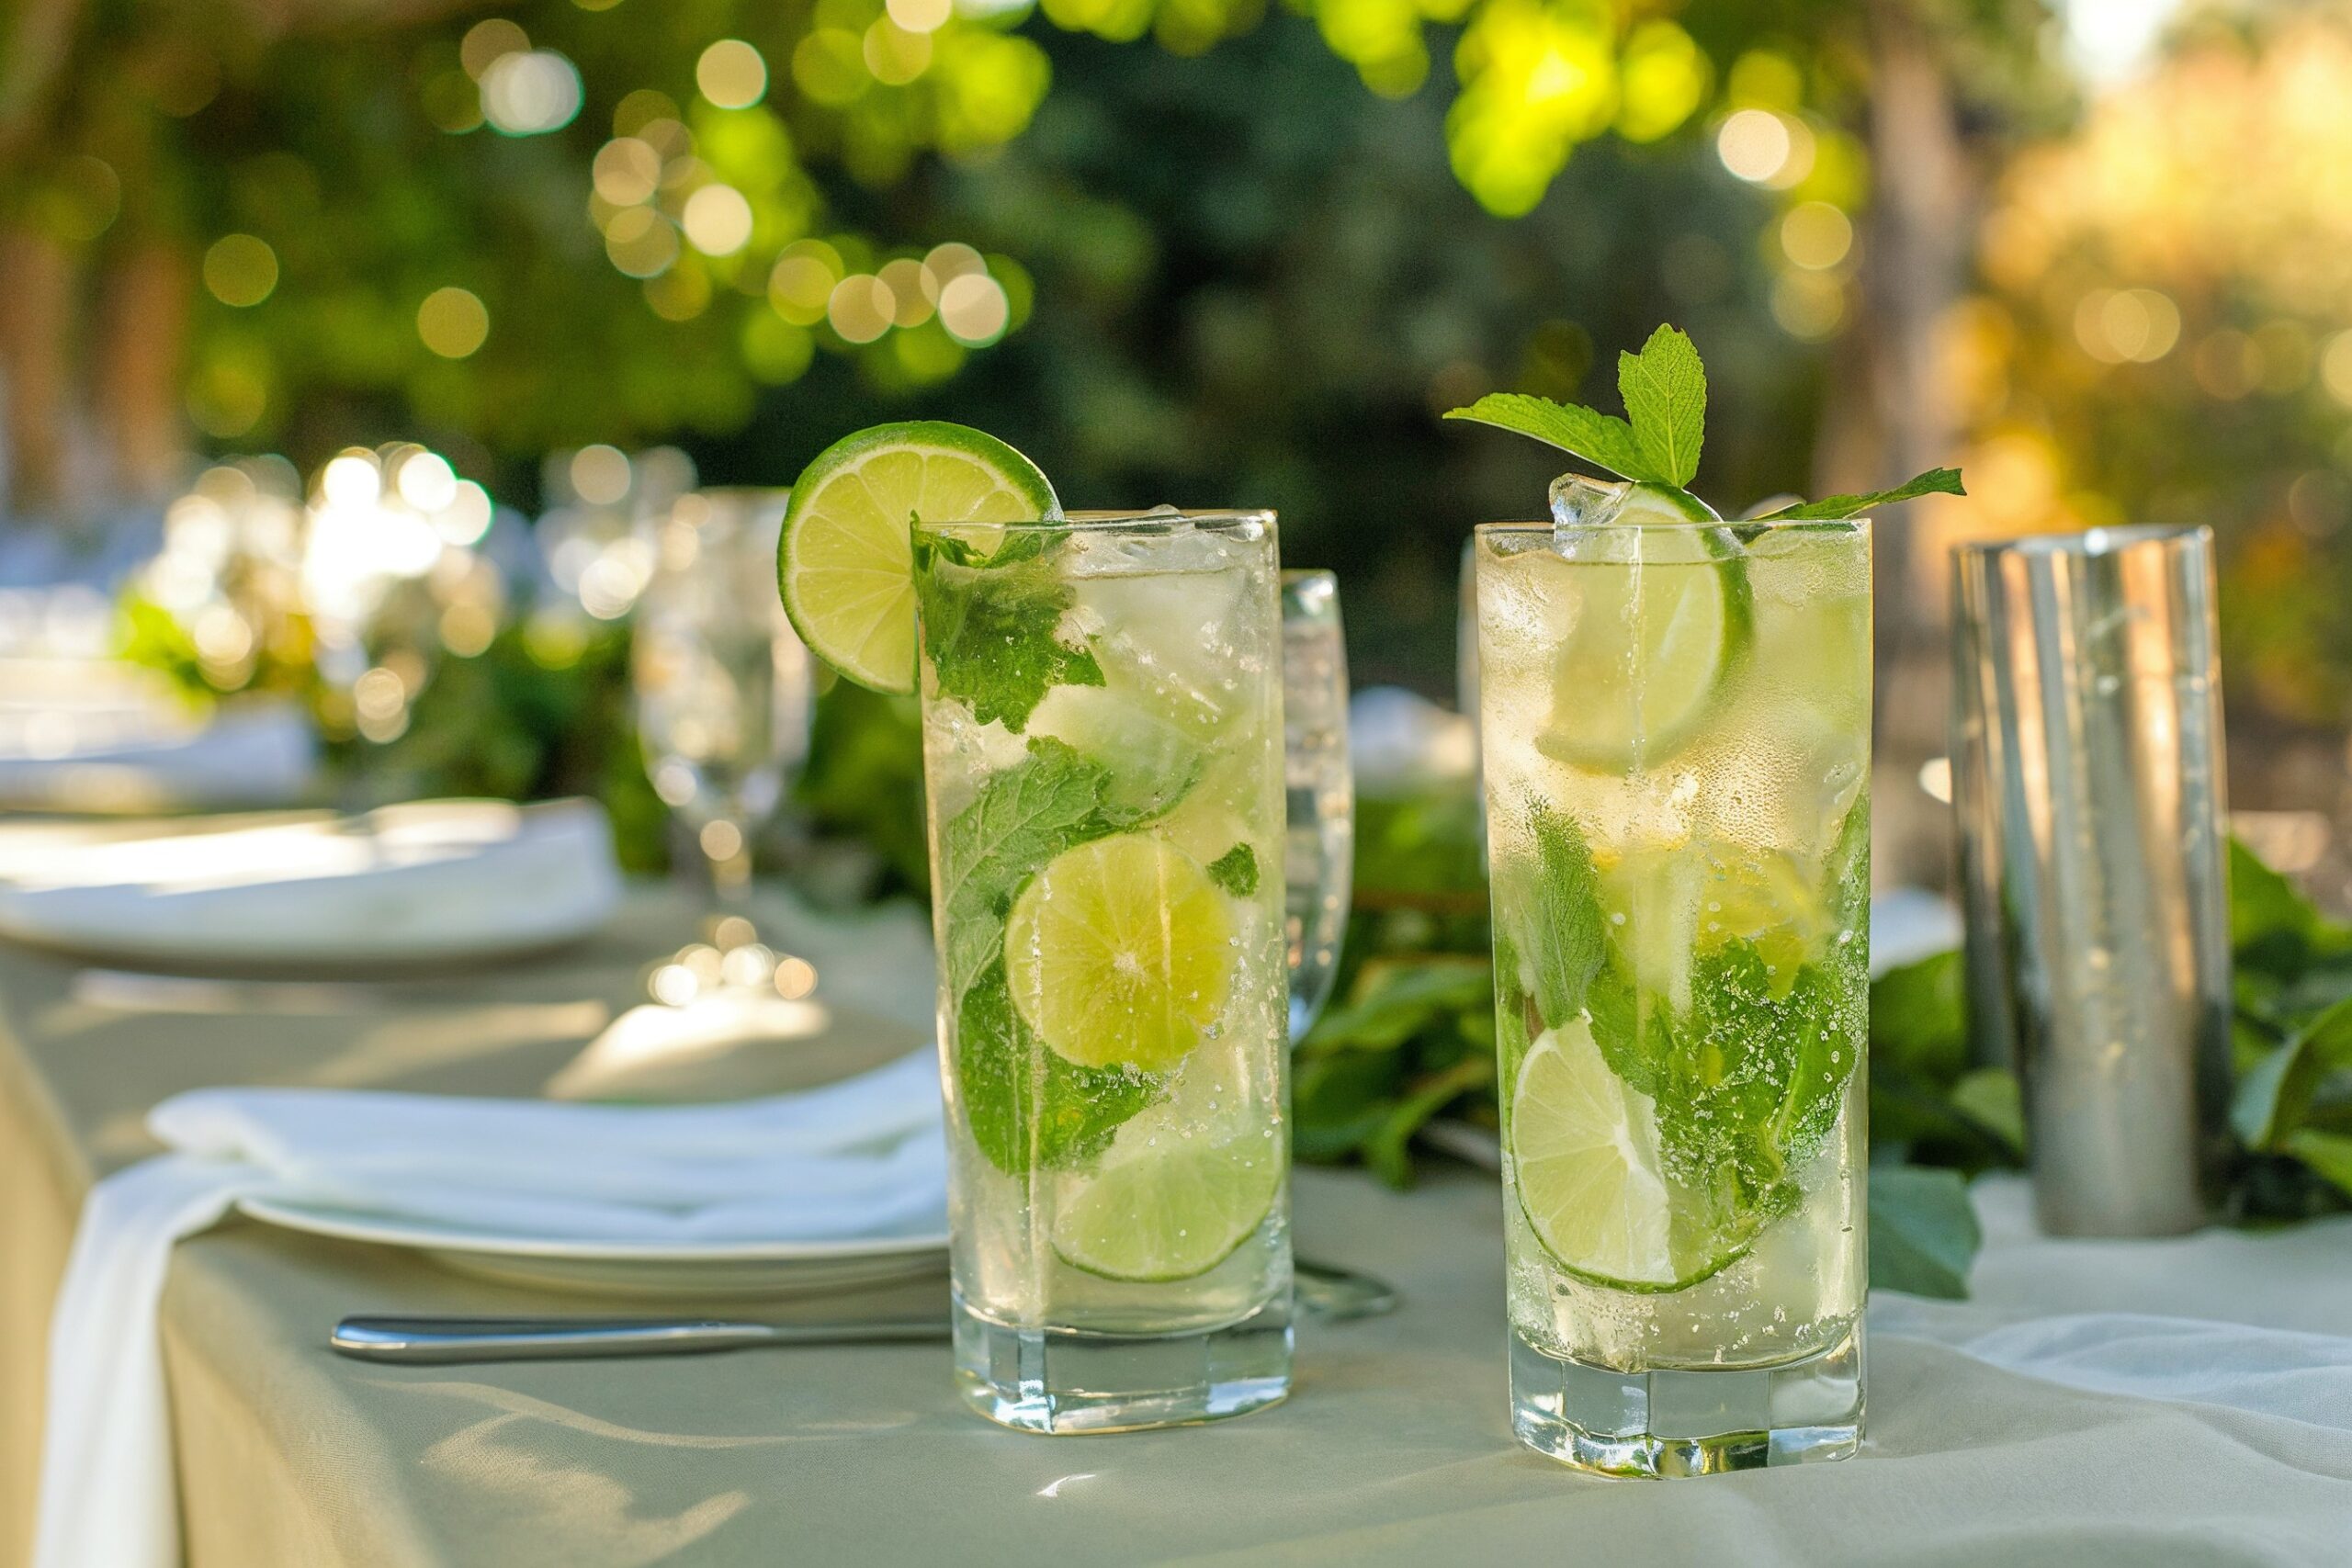 Two tall glasses of mojitos garnished with lime slices and mint leaves sit on a table set for an outdoor meal.